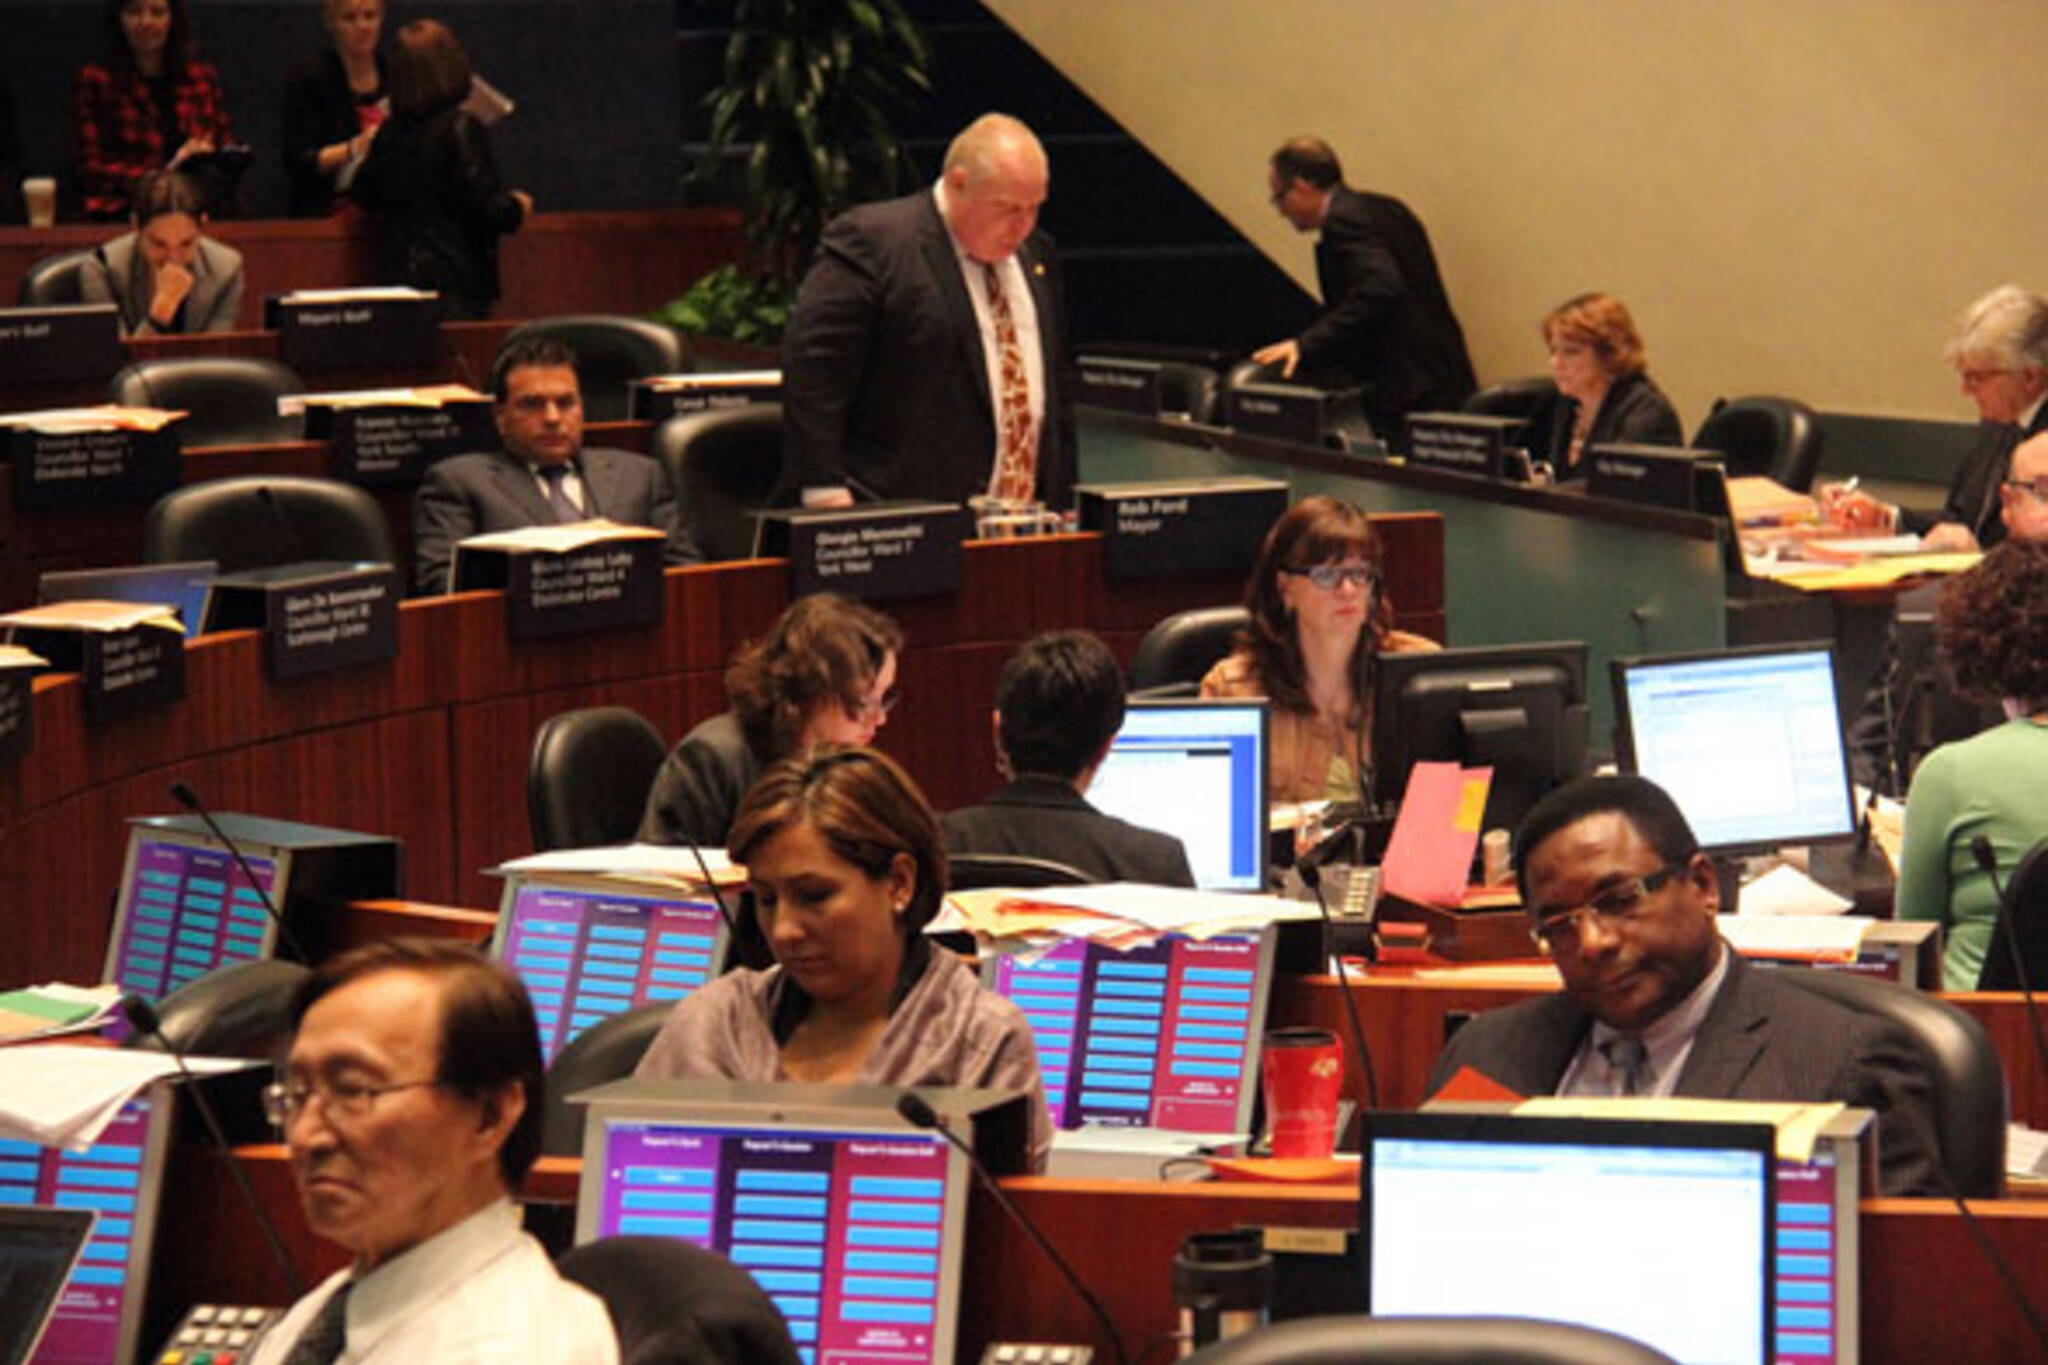 City Council Rob Ford